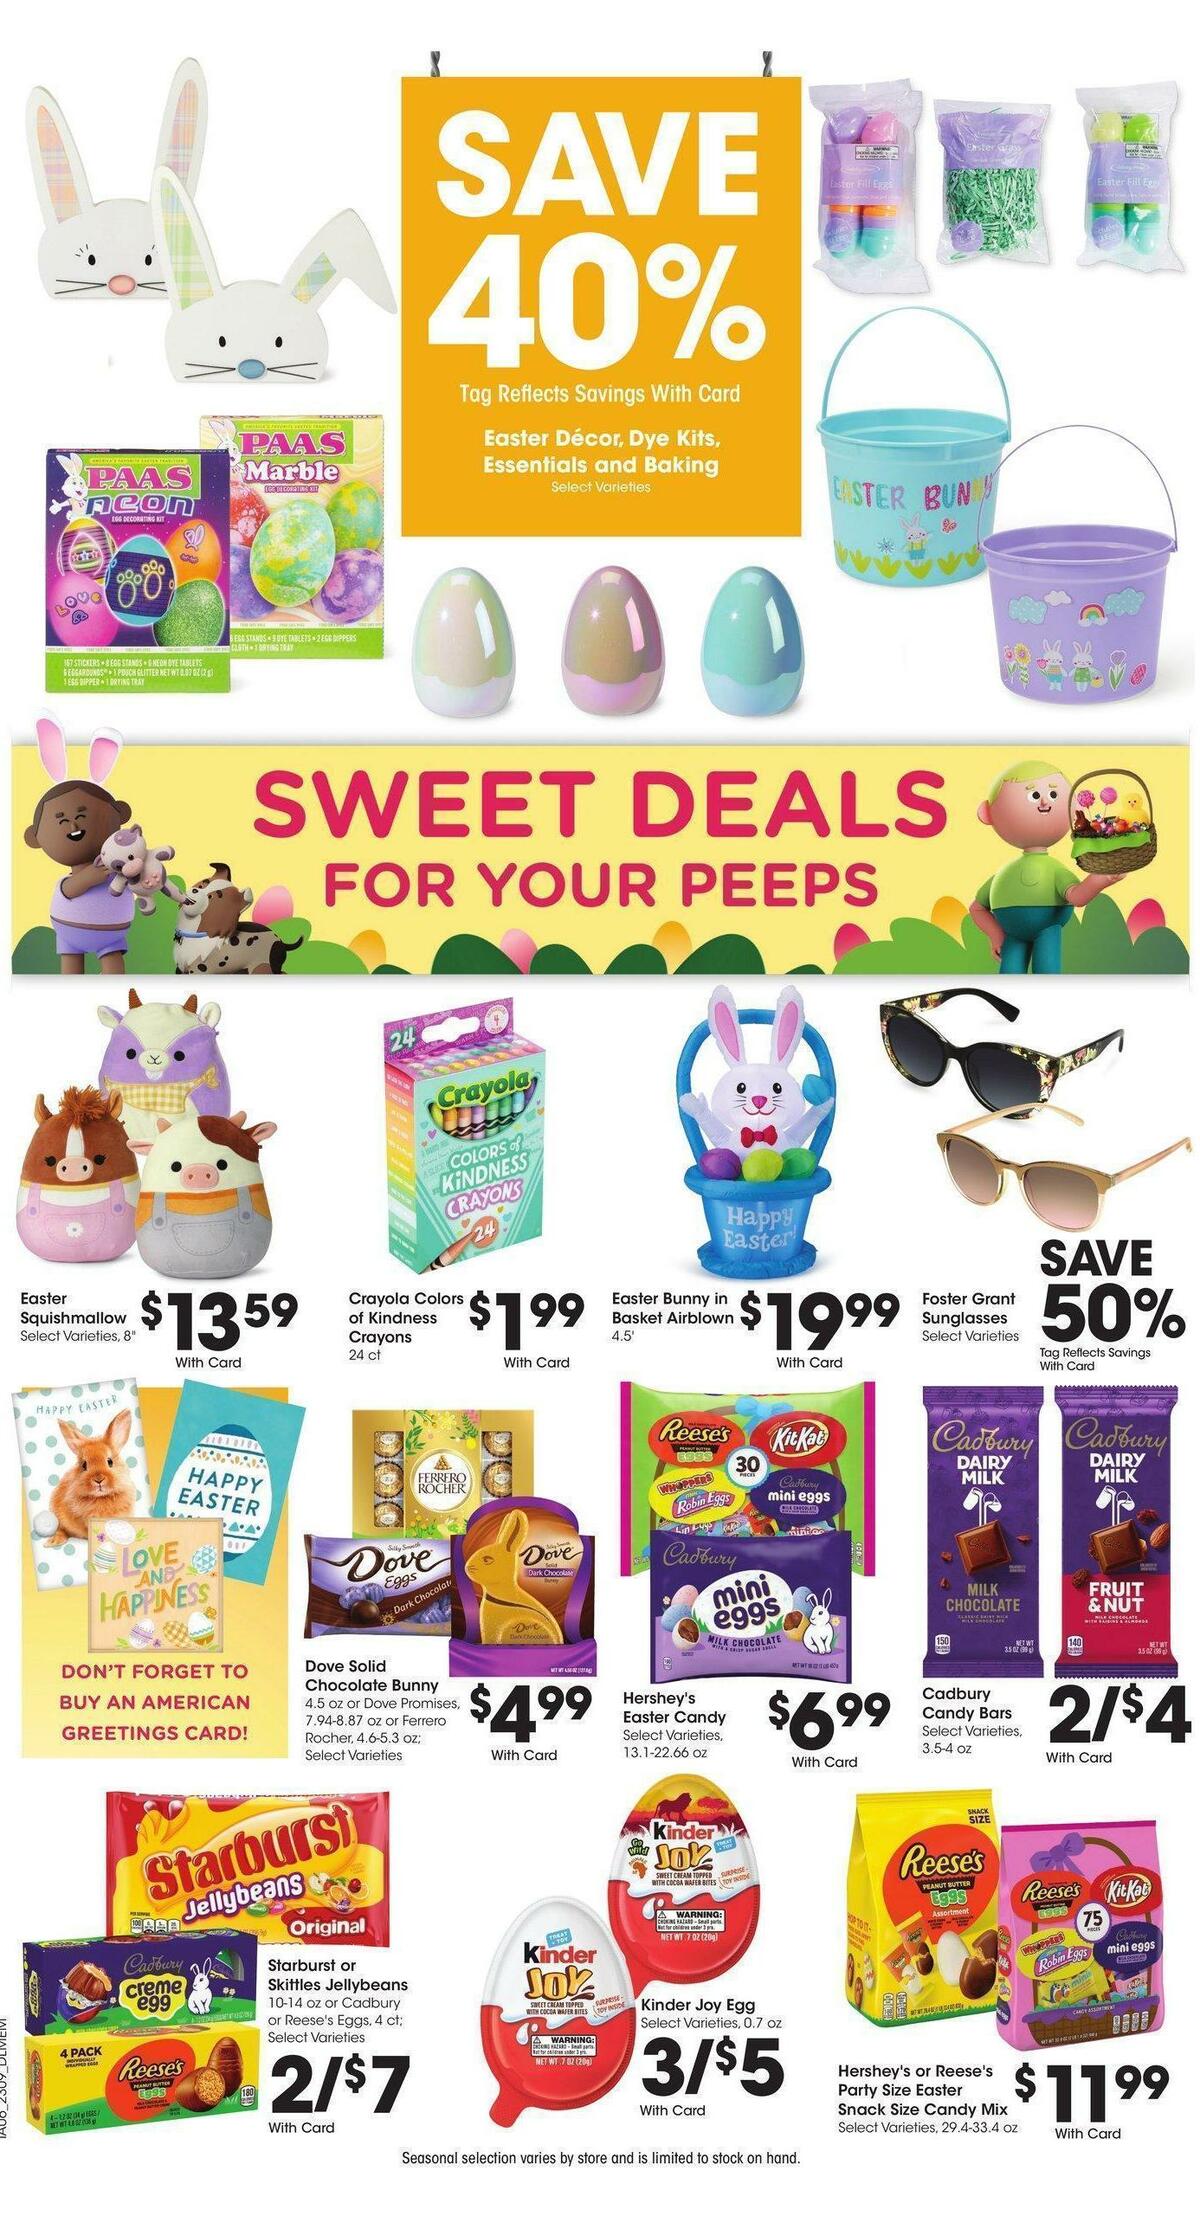 Kroger Weekly Ad from March 29